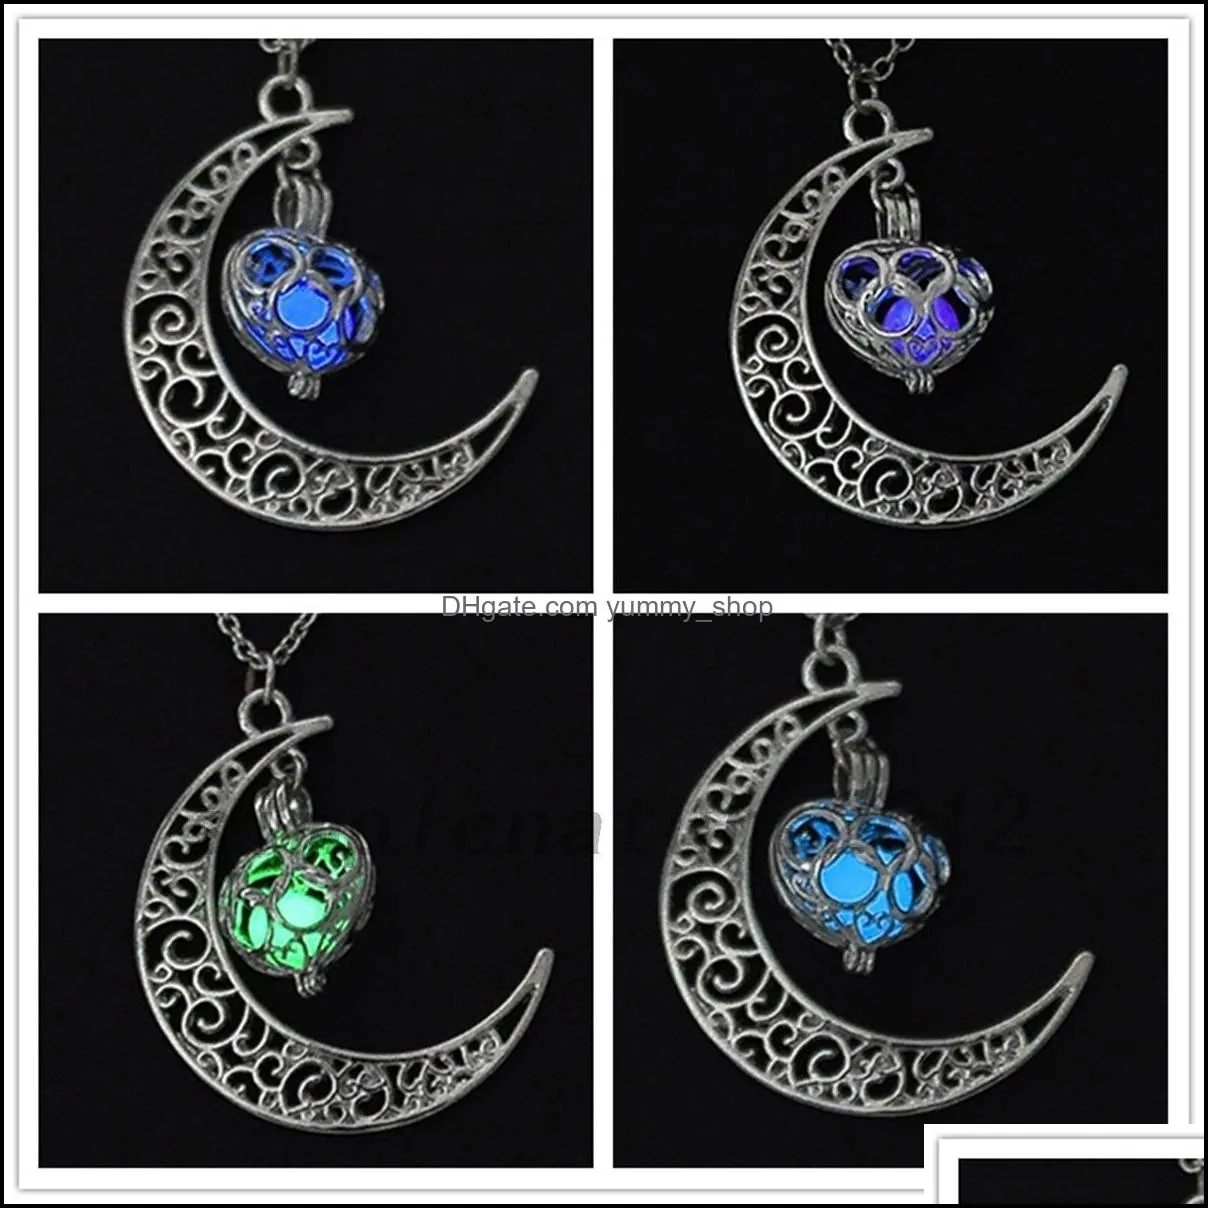 glowing in the dark pendant necklaces choker necklace collares jewelry